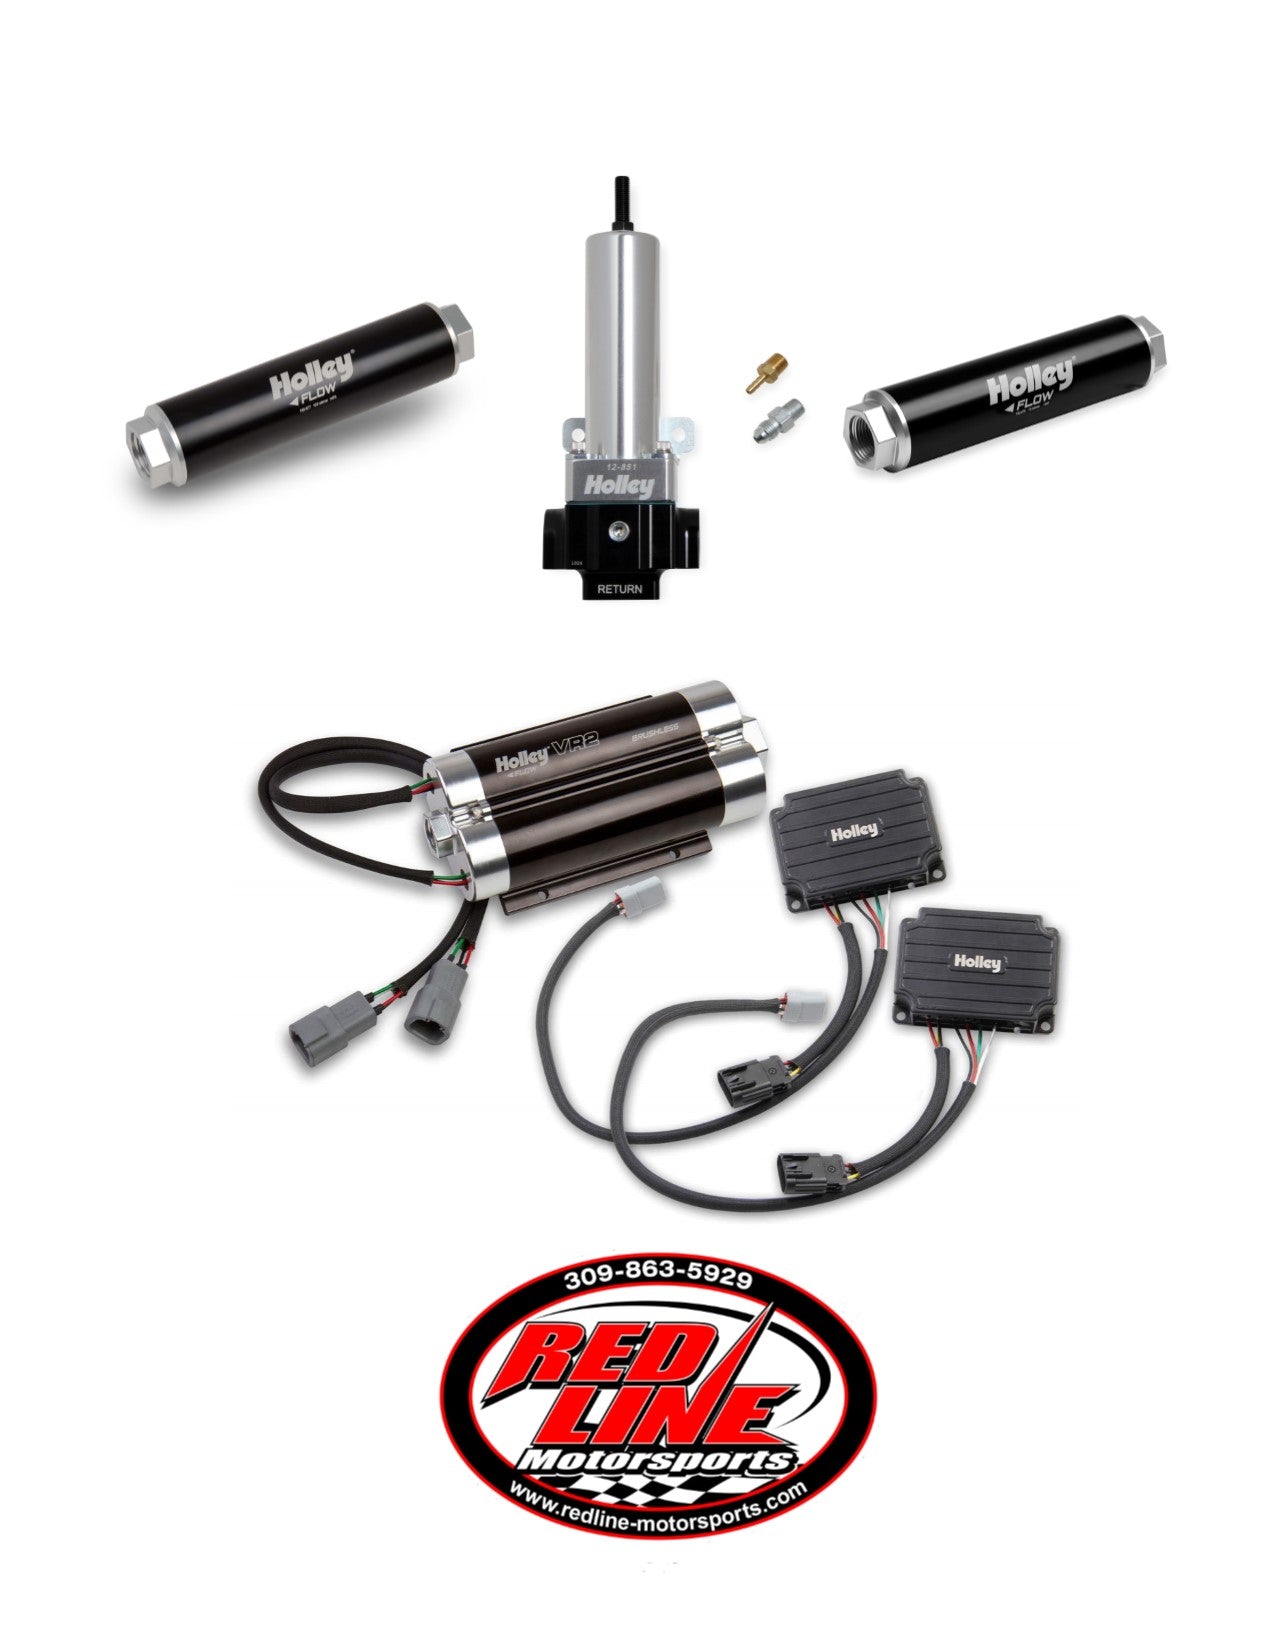 VR2 BRUSHLESS FUEL PUMP-SINGLE 16AN INLET WITH 2 PORT REGULATOR KIT (Up to 3200 HP N/A or 1900 HP Boosted on Gasoline at 13.8V)